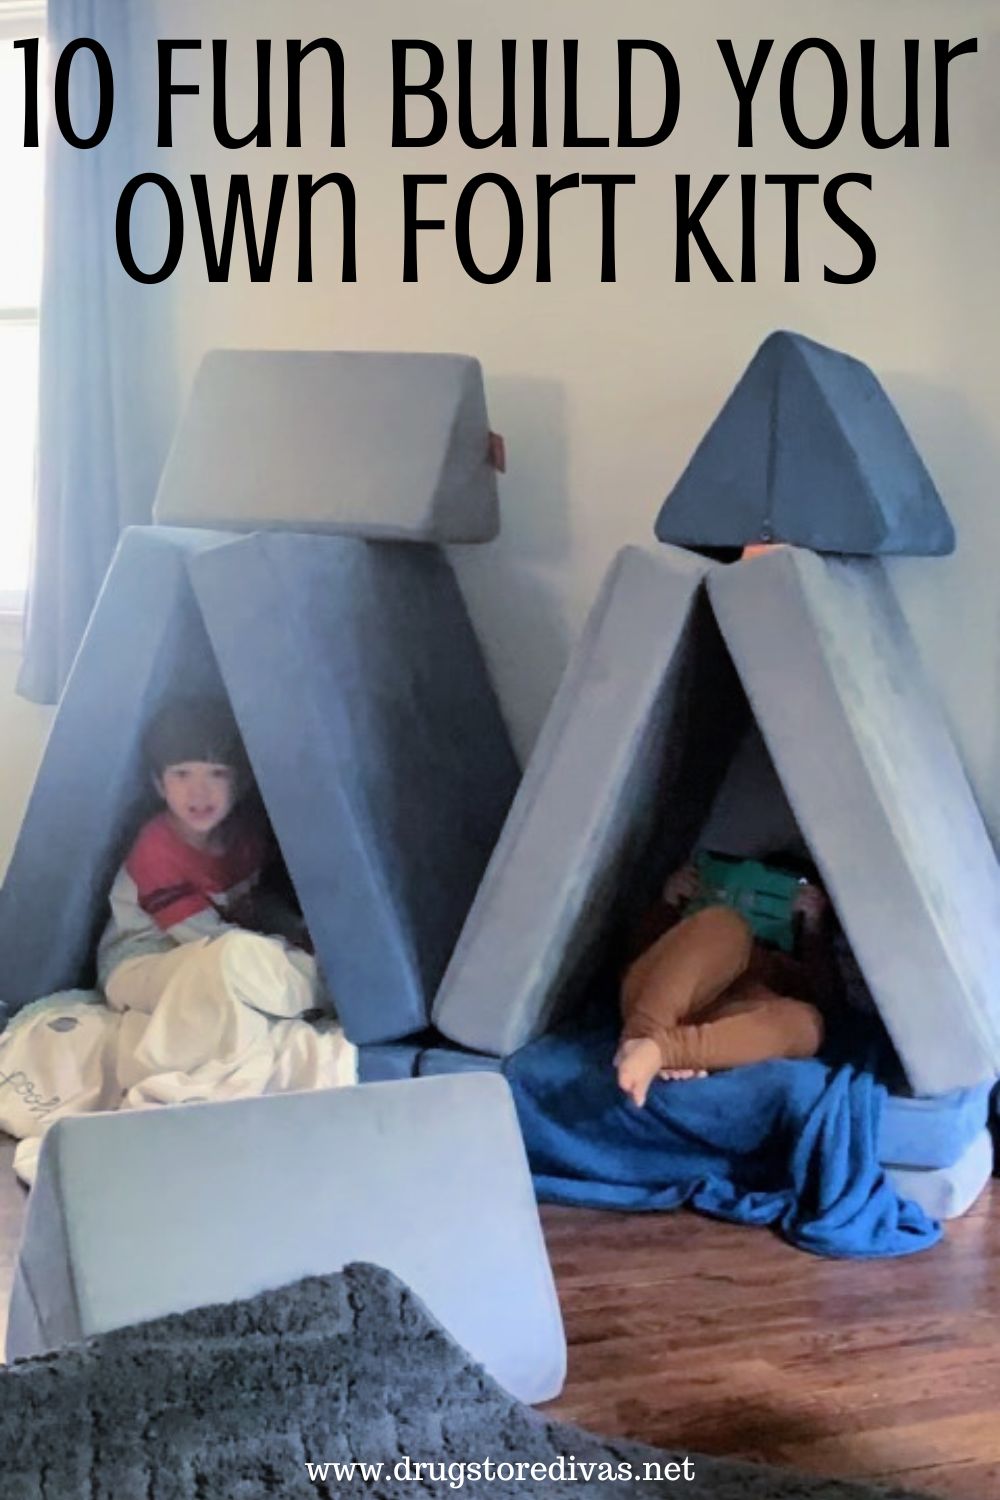 10 Fun Build Your Own Fort Kits